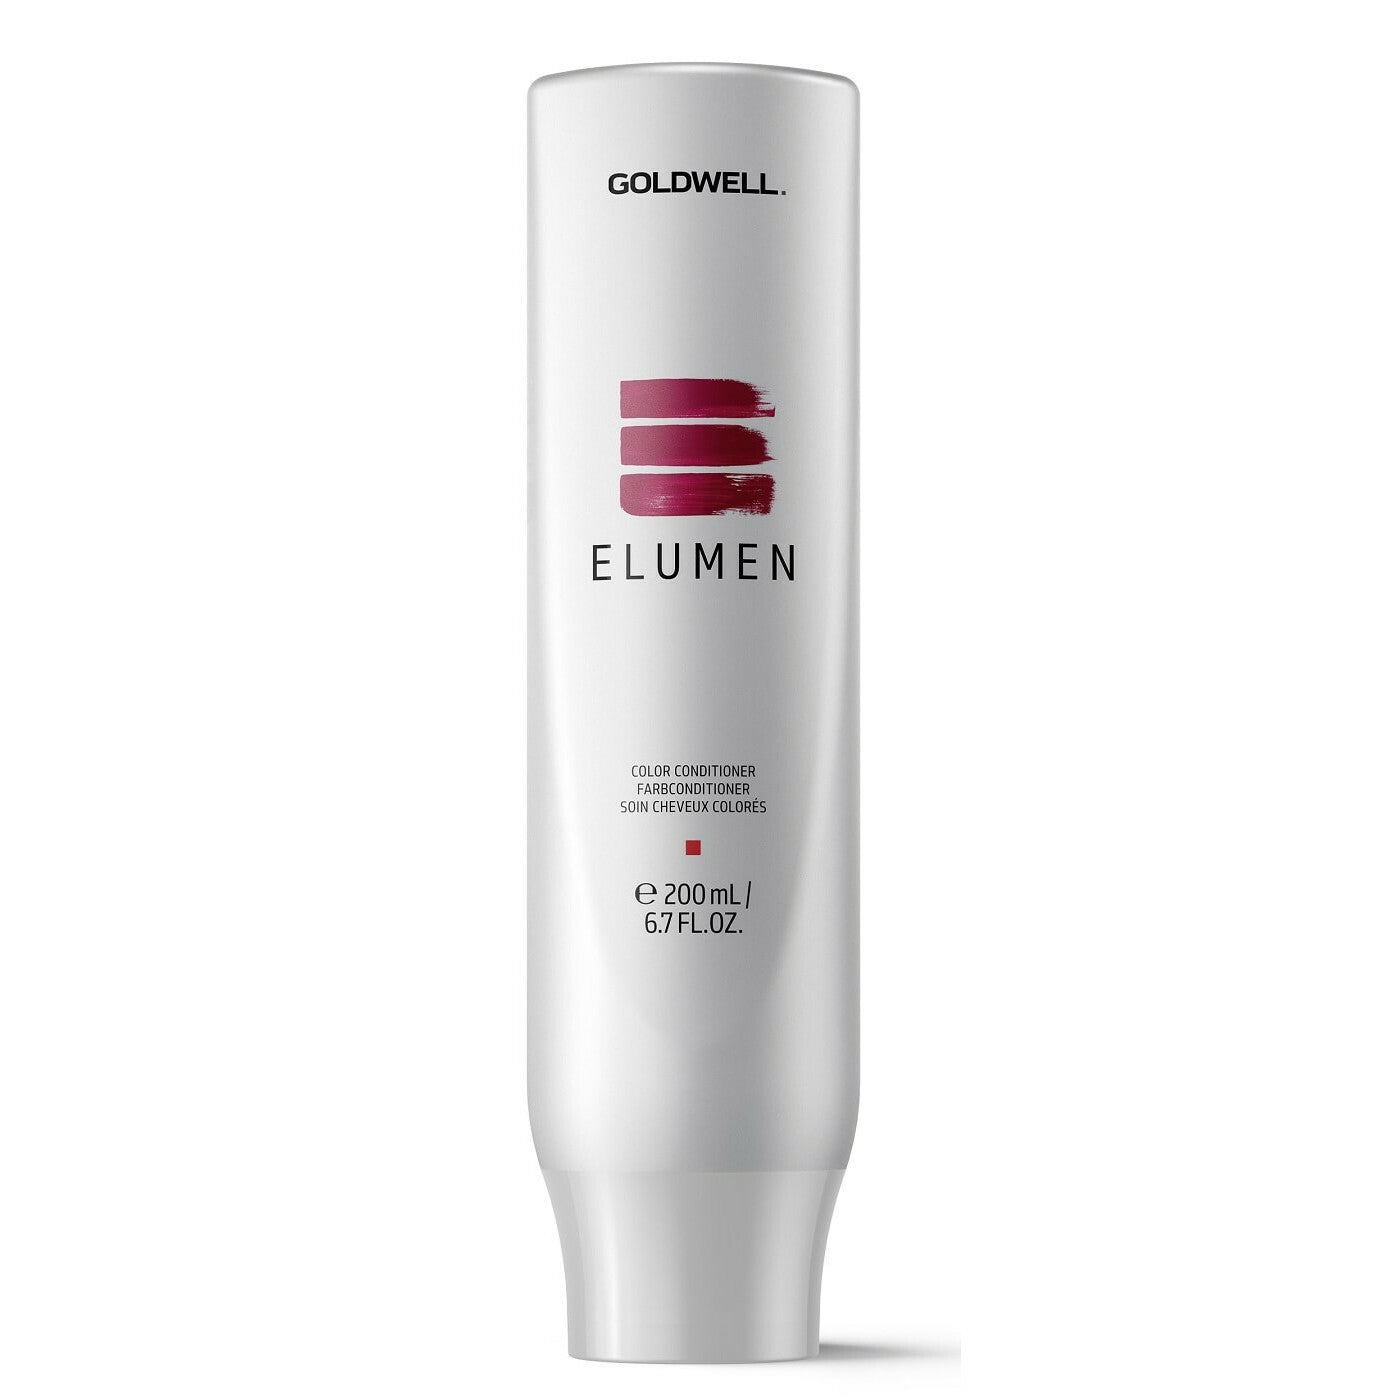 Goldwell Elumen Conditioner 200ml - shelley and co